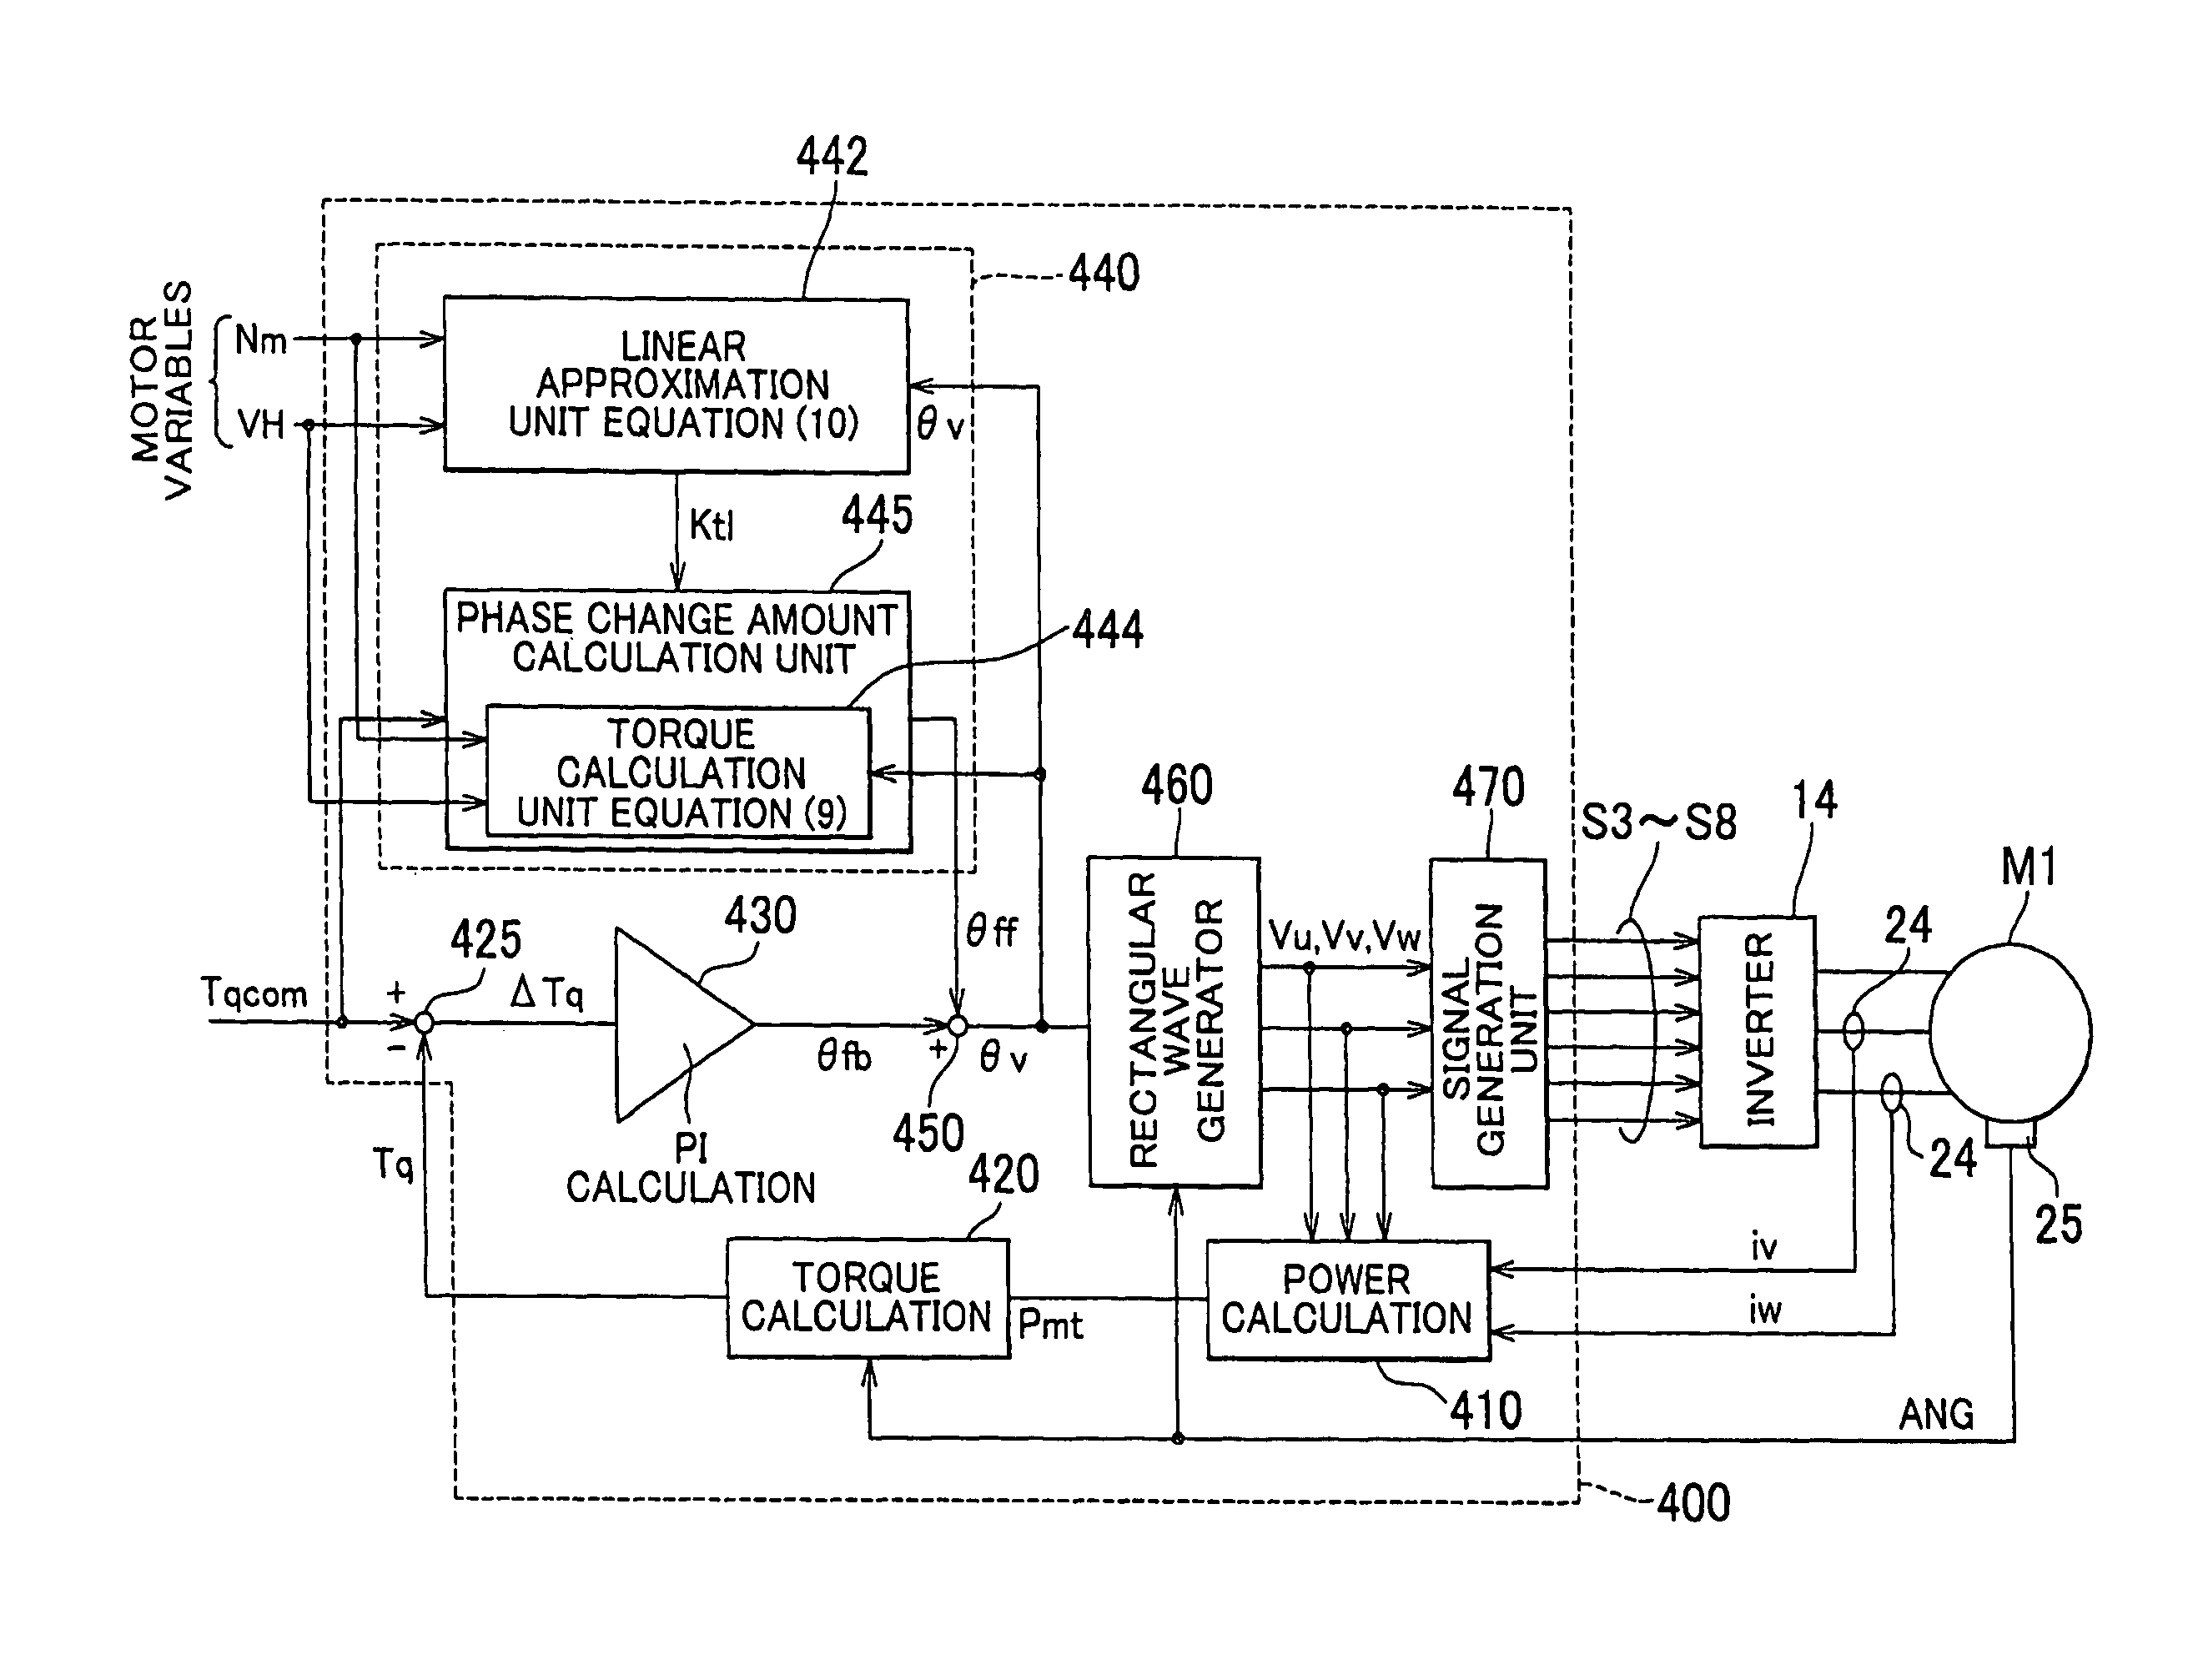 Control system for AC motor